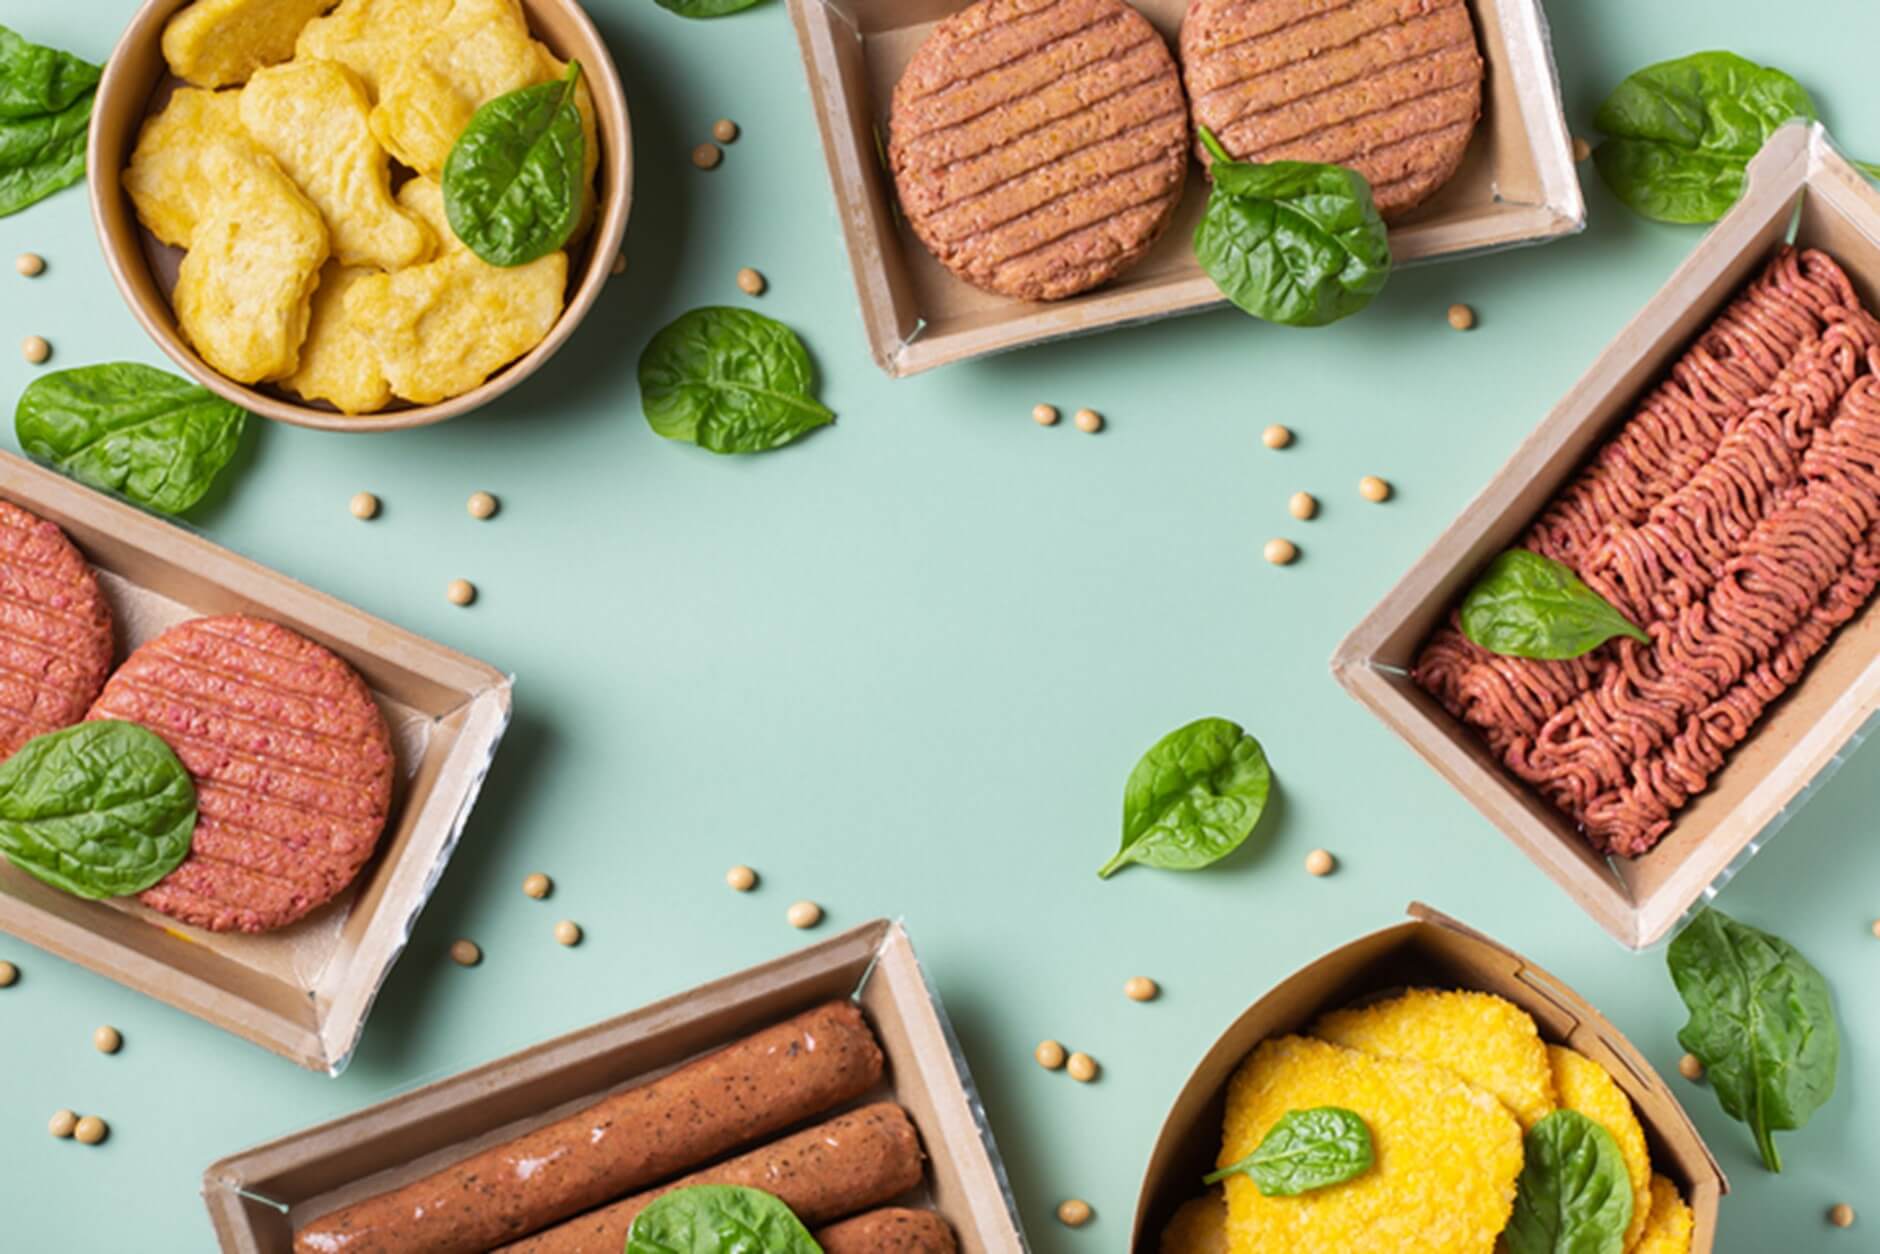 Examples of food innovation including meat-free burgers and sausages in dishes, placed on a pale green background with basil leaves scattered over.